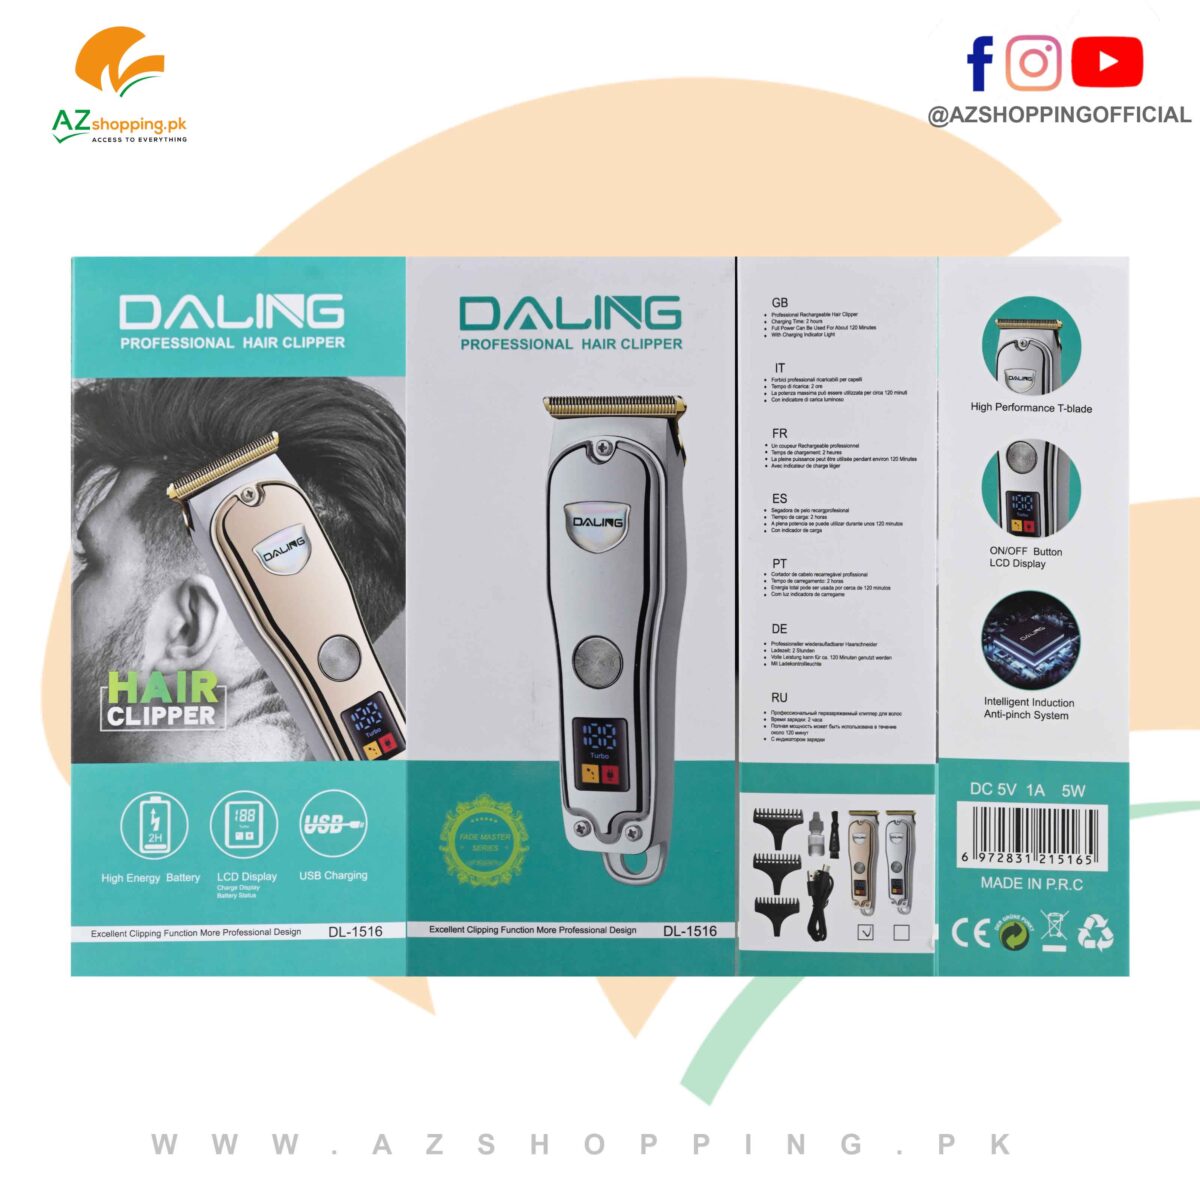 Daling - Professional Stainless Steel Electric Hair Clipper, Trimmer, Shaver & Shaving Machine with High-Performance T-Blade, LCD Display, ON/OFF Button, Intelligent induction Anti-pinch System – Model: DL-1516